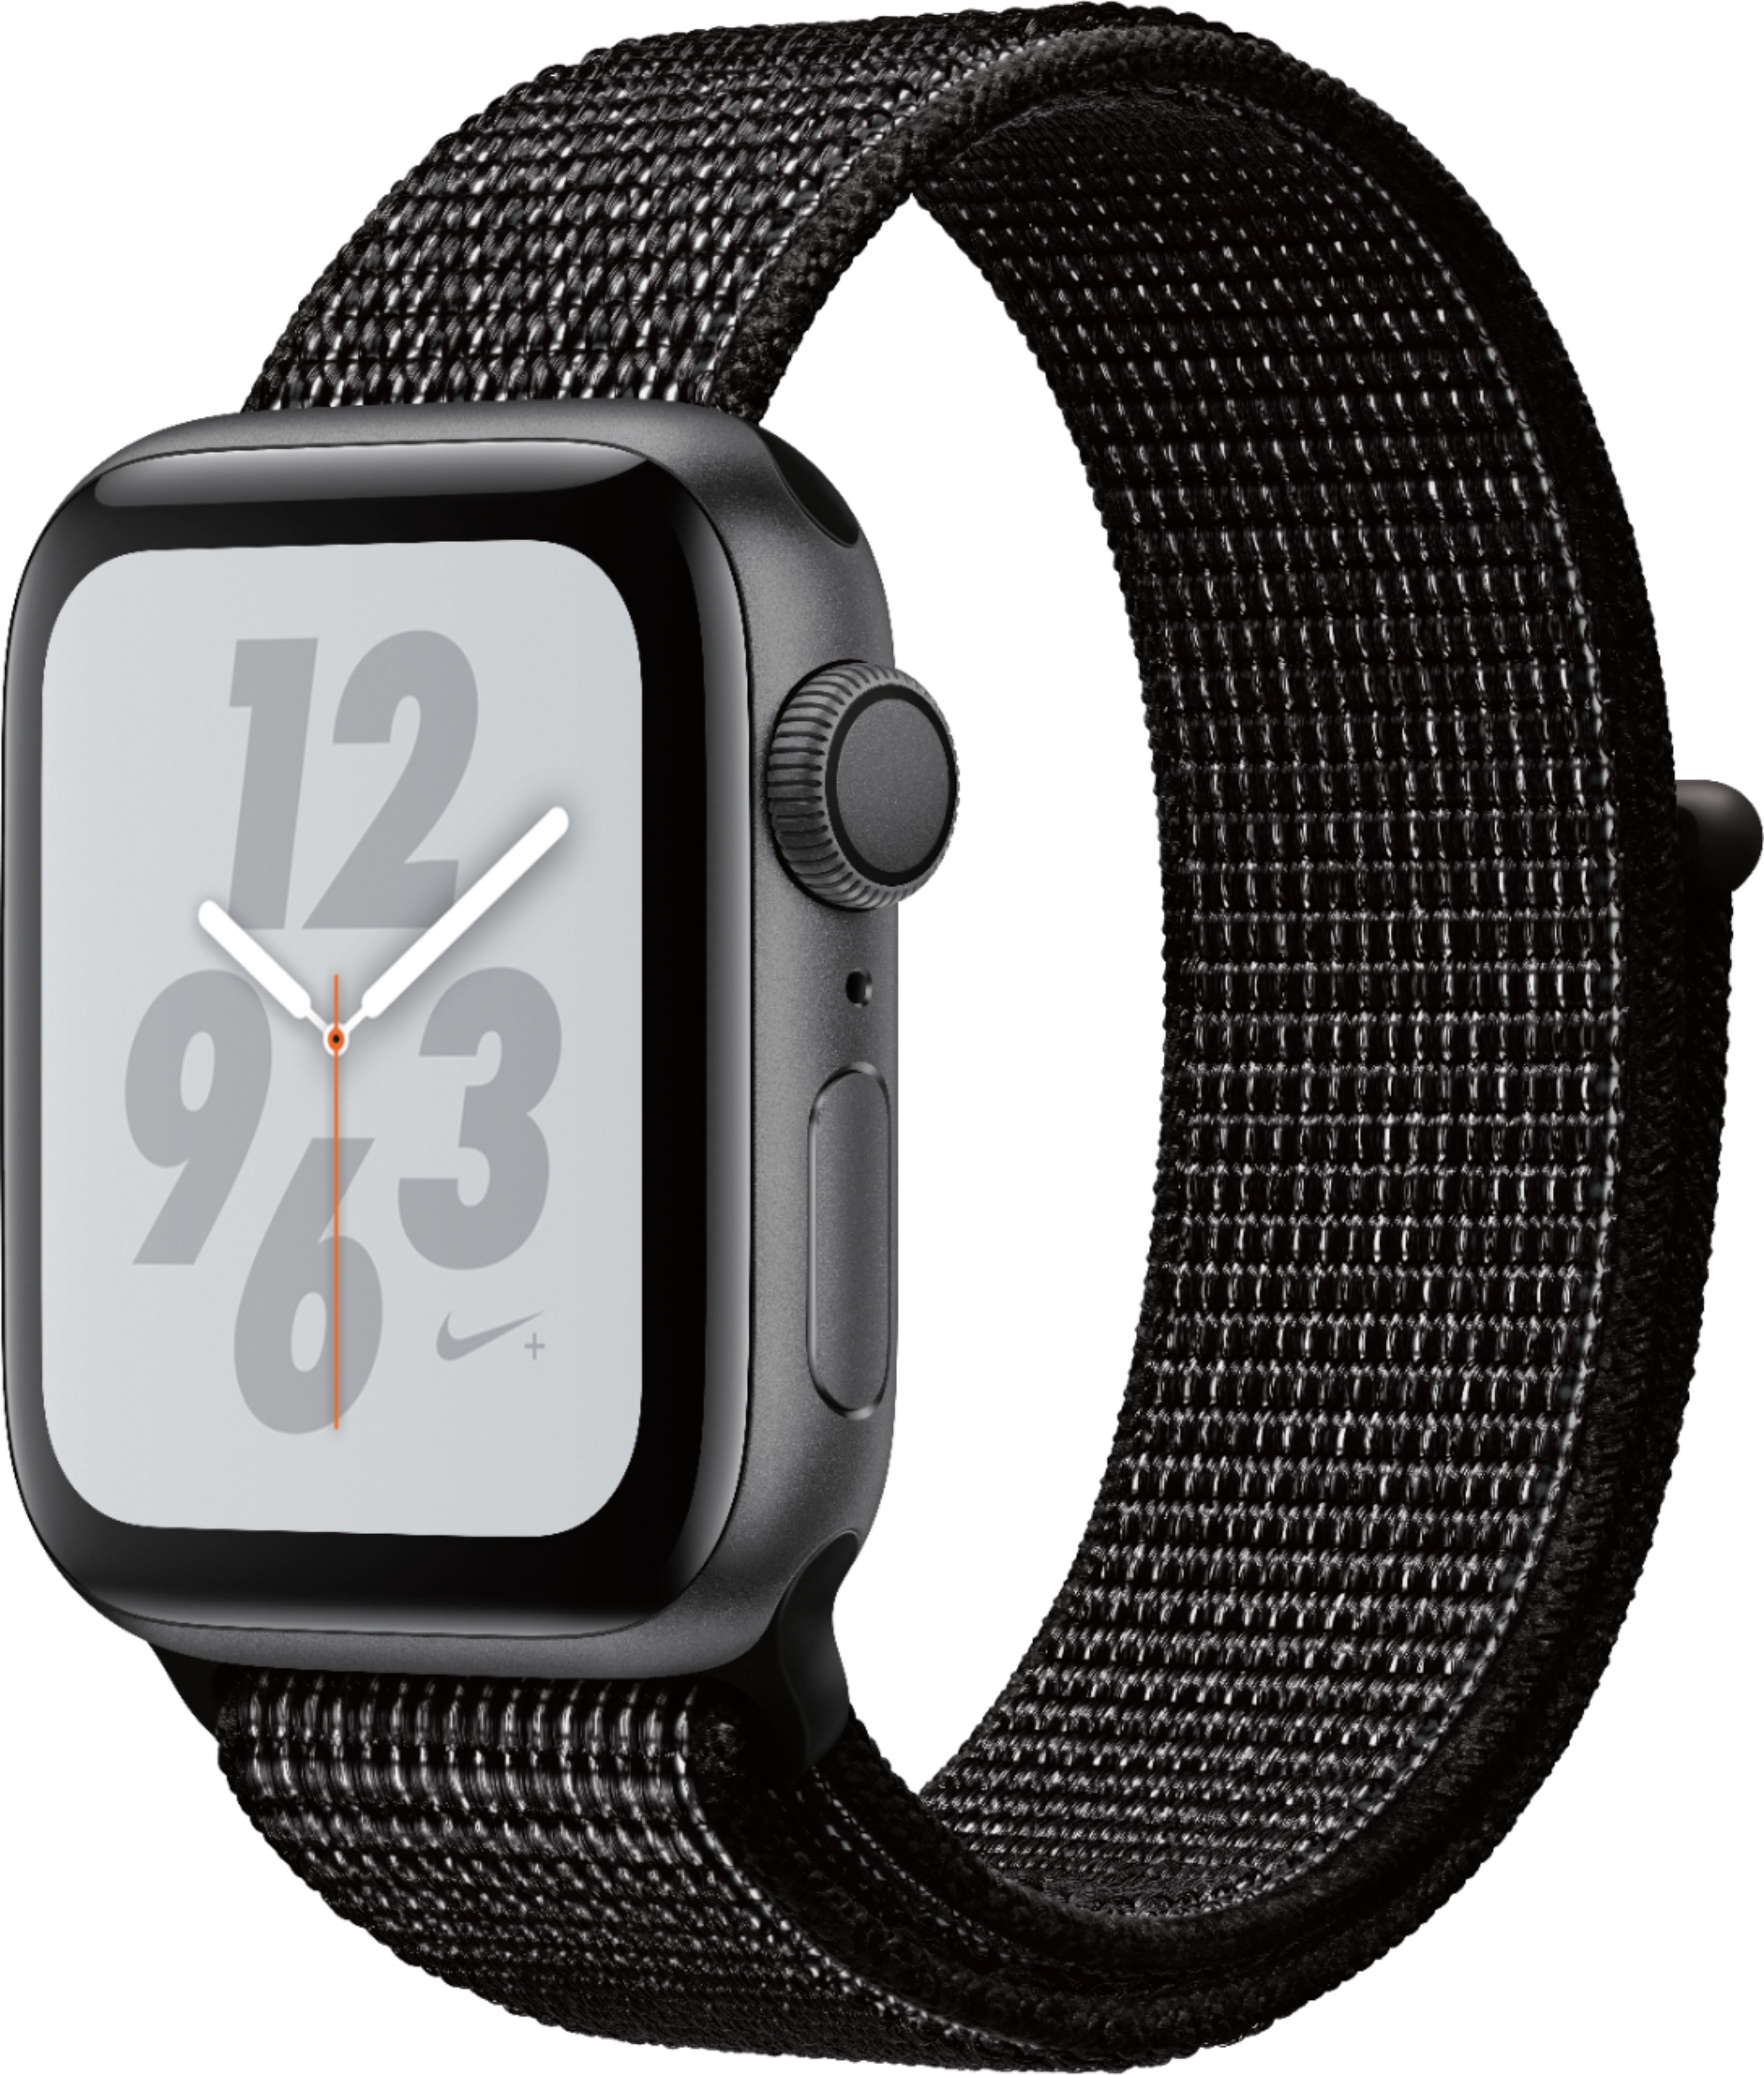 Rent to own Apple Watch Nike+ Series 4 (GPS) 40mm Space Gray Aluminum Case with Black Nike Sport Loop - Space Gray Aluminum